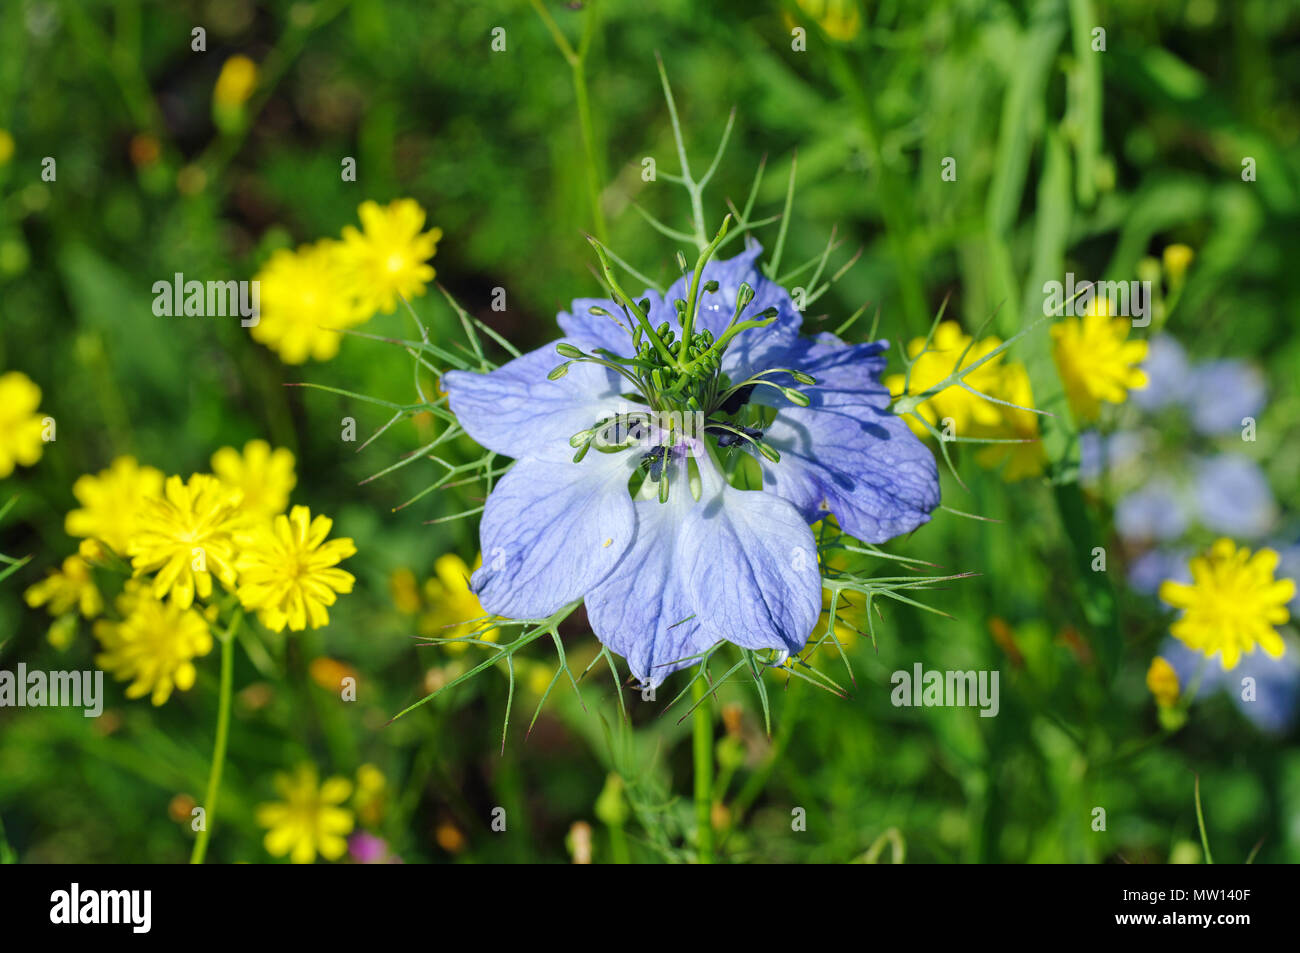 Nigella damascena, the Love-in-a-mist (family Ranunculaceae), in a meadow Stock Photo